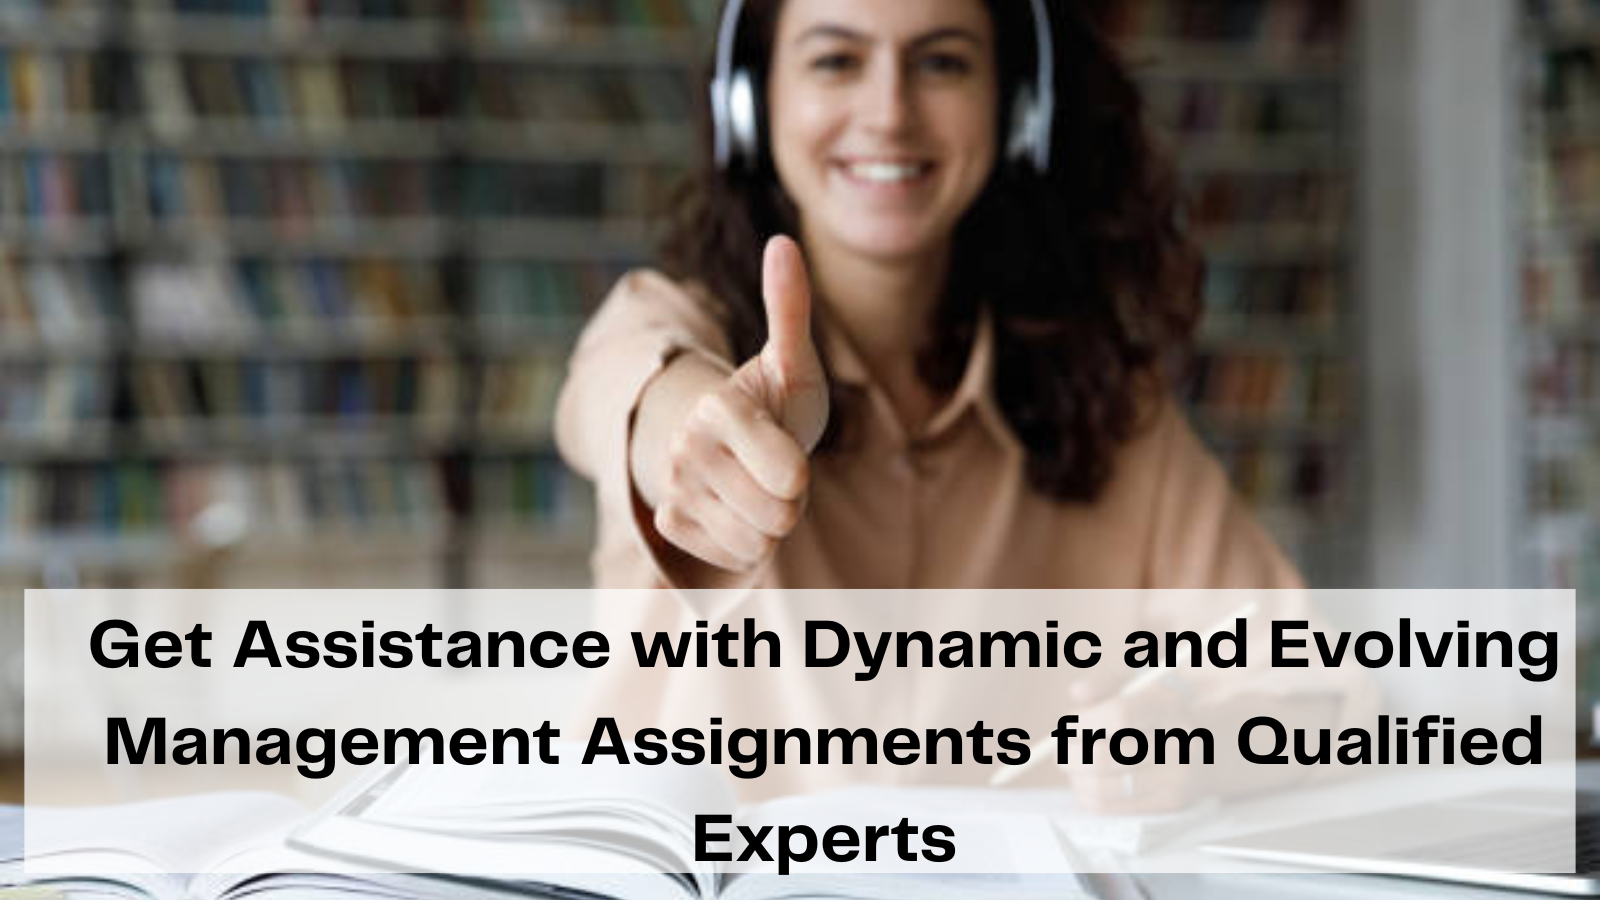 Get Assistance with Management Assignment from Qualified Experts